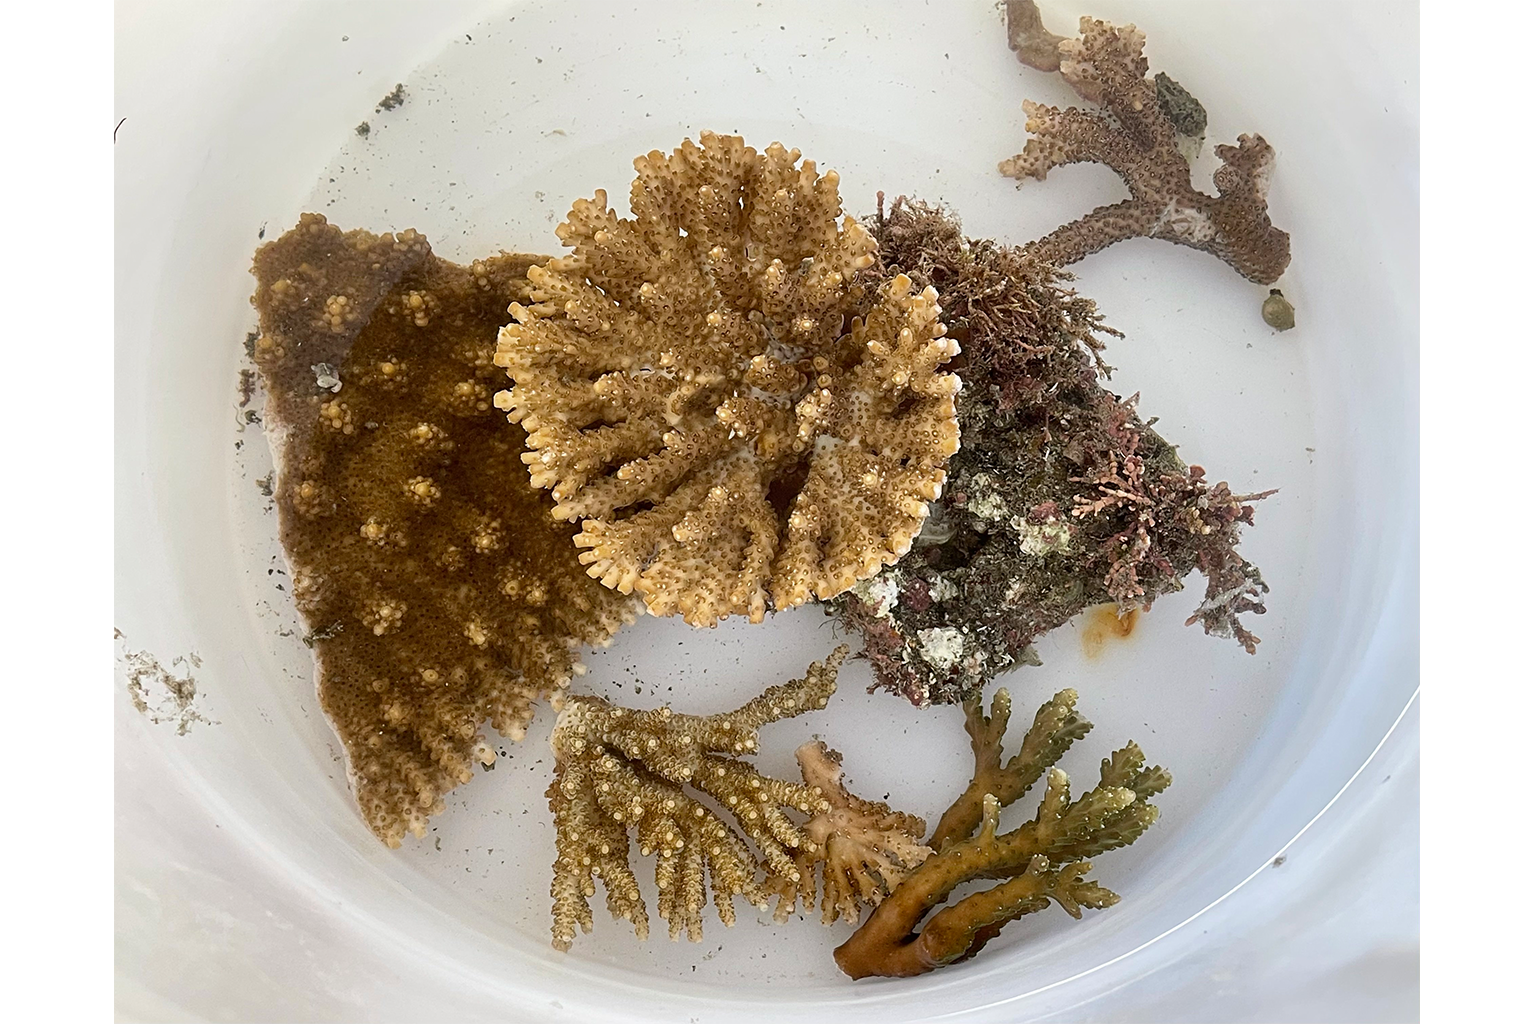 Coral collected from Tateyama by Yasuda and team. 